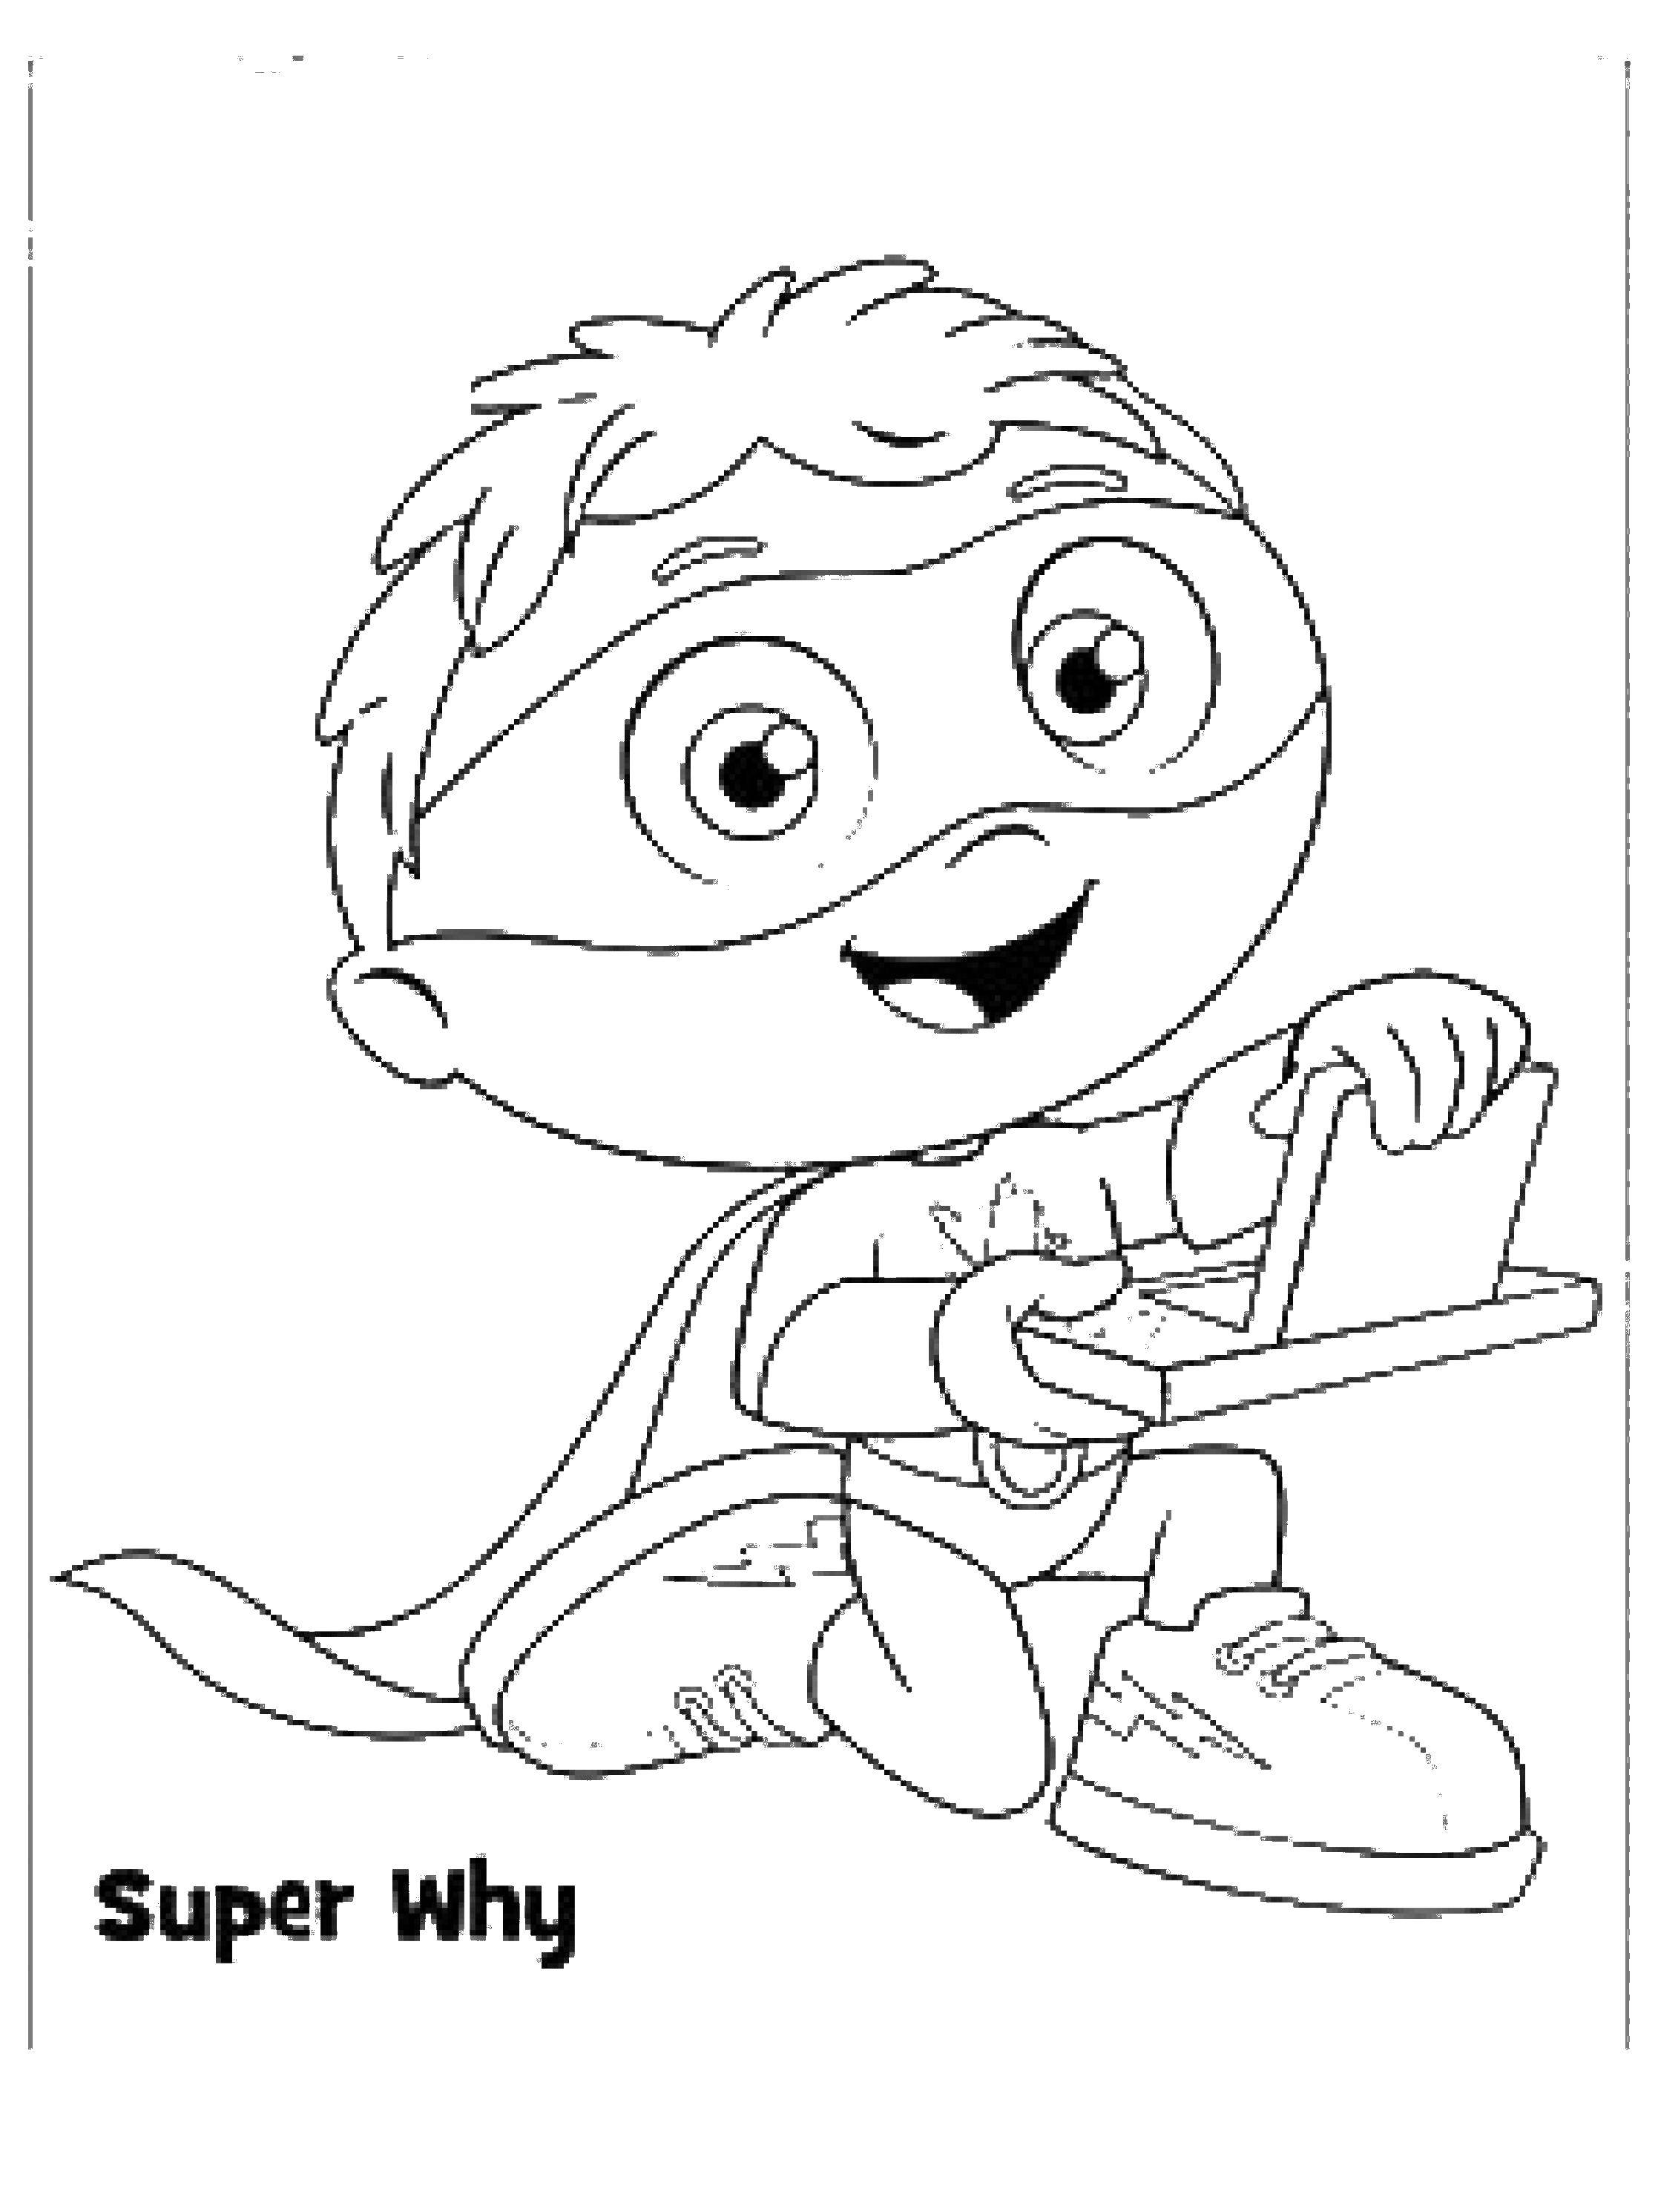 Super why Coloring Pages